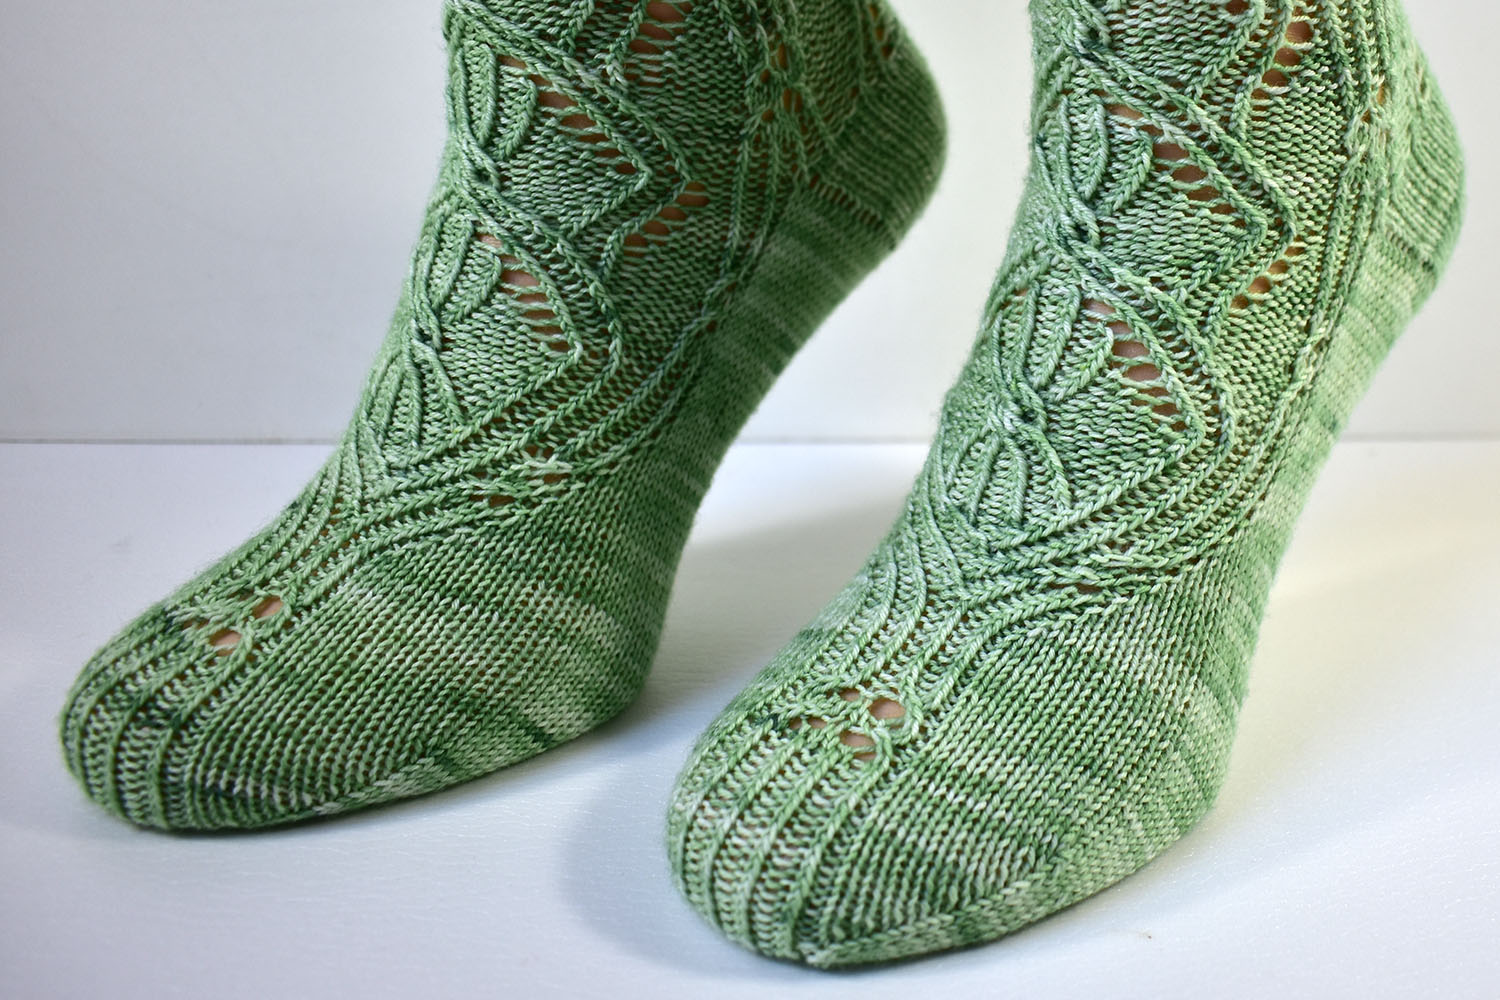 Foot detail of Triforium sock pattern with cables and lace